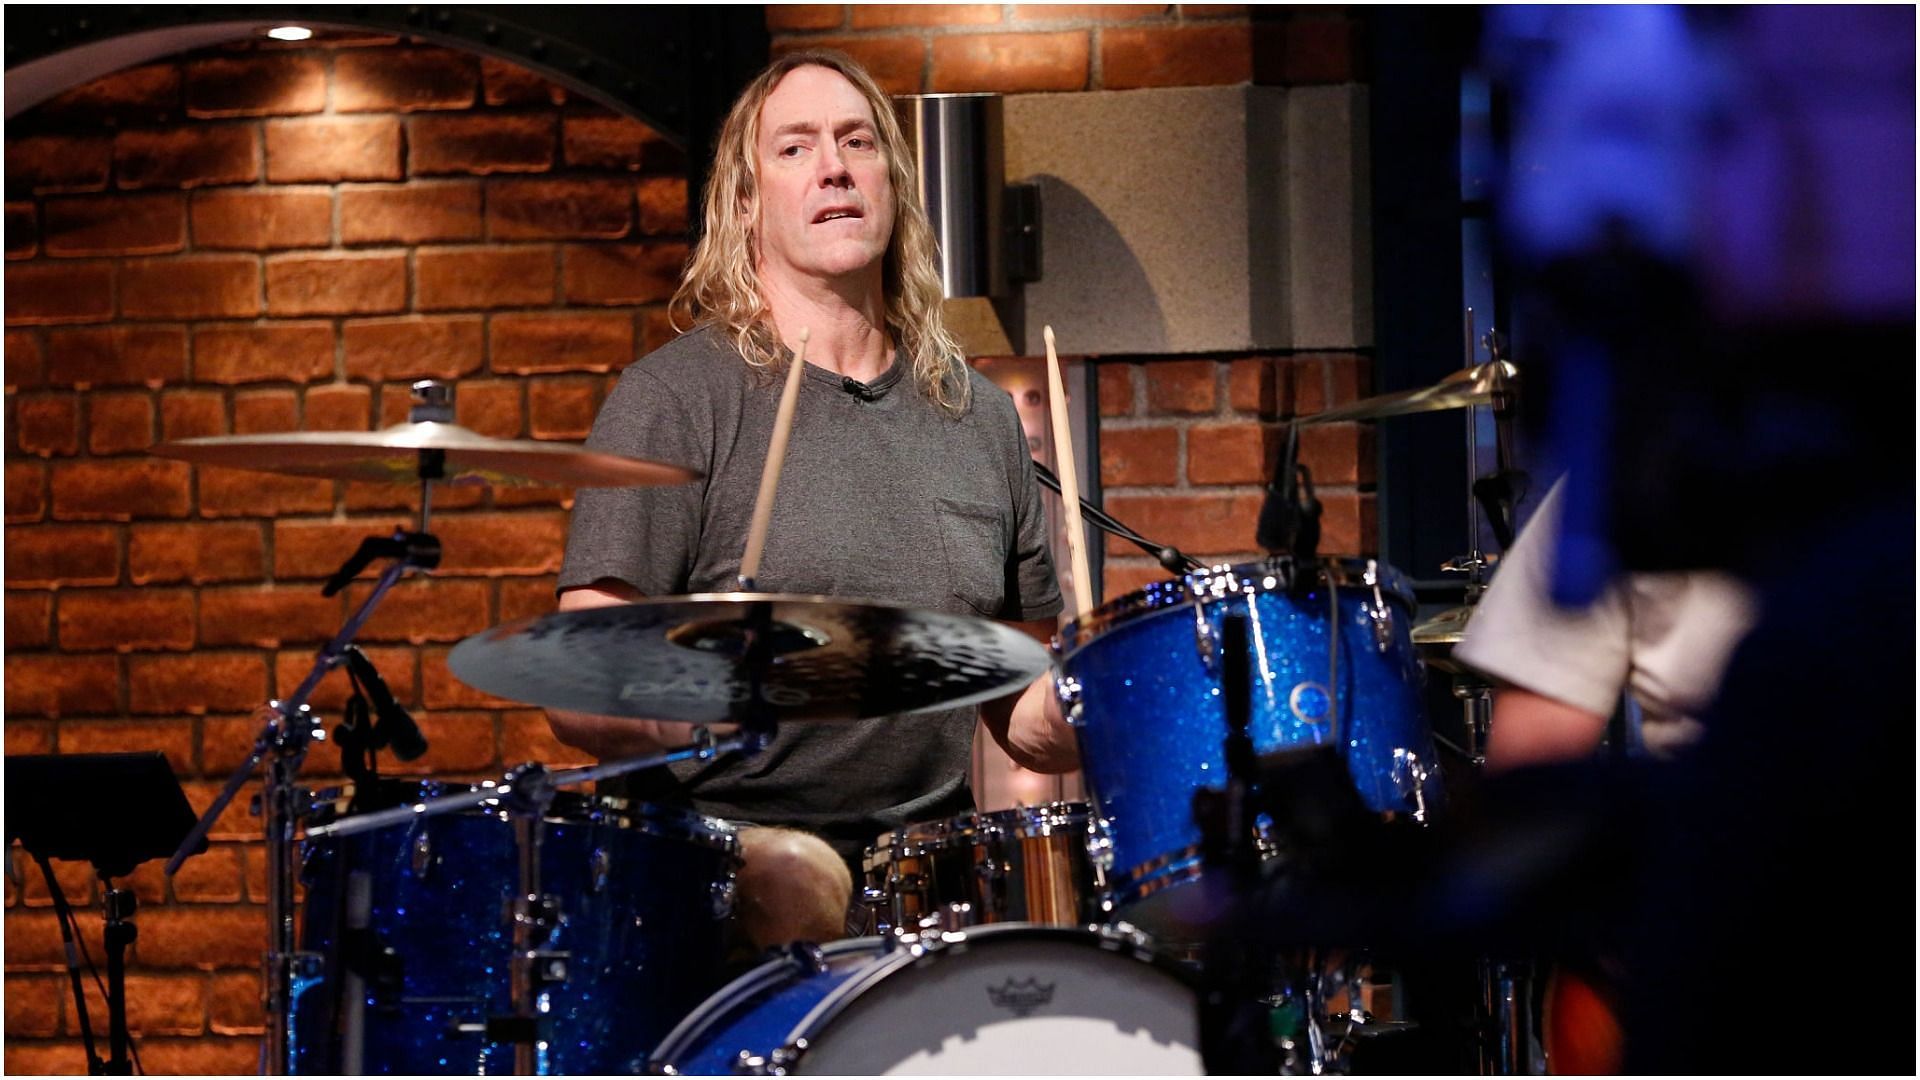 Danny Carey was recently arrested for being involved in a fight (Image by Lloyd Bishop via Getty Images)